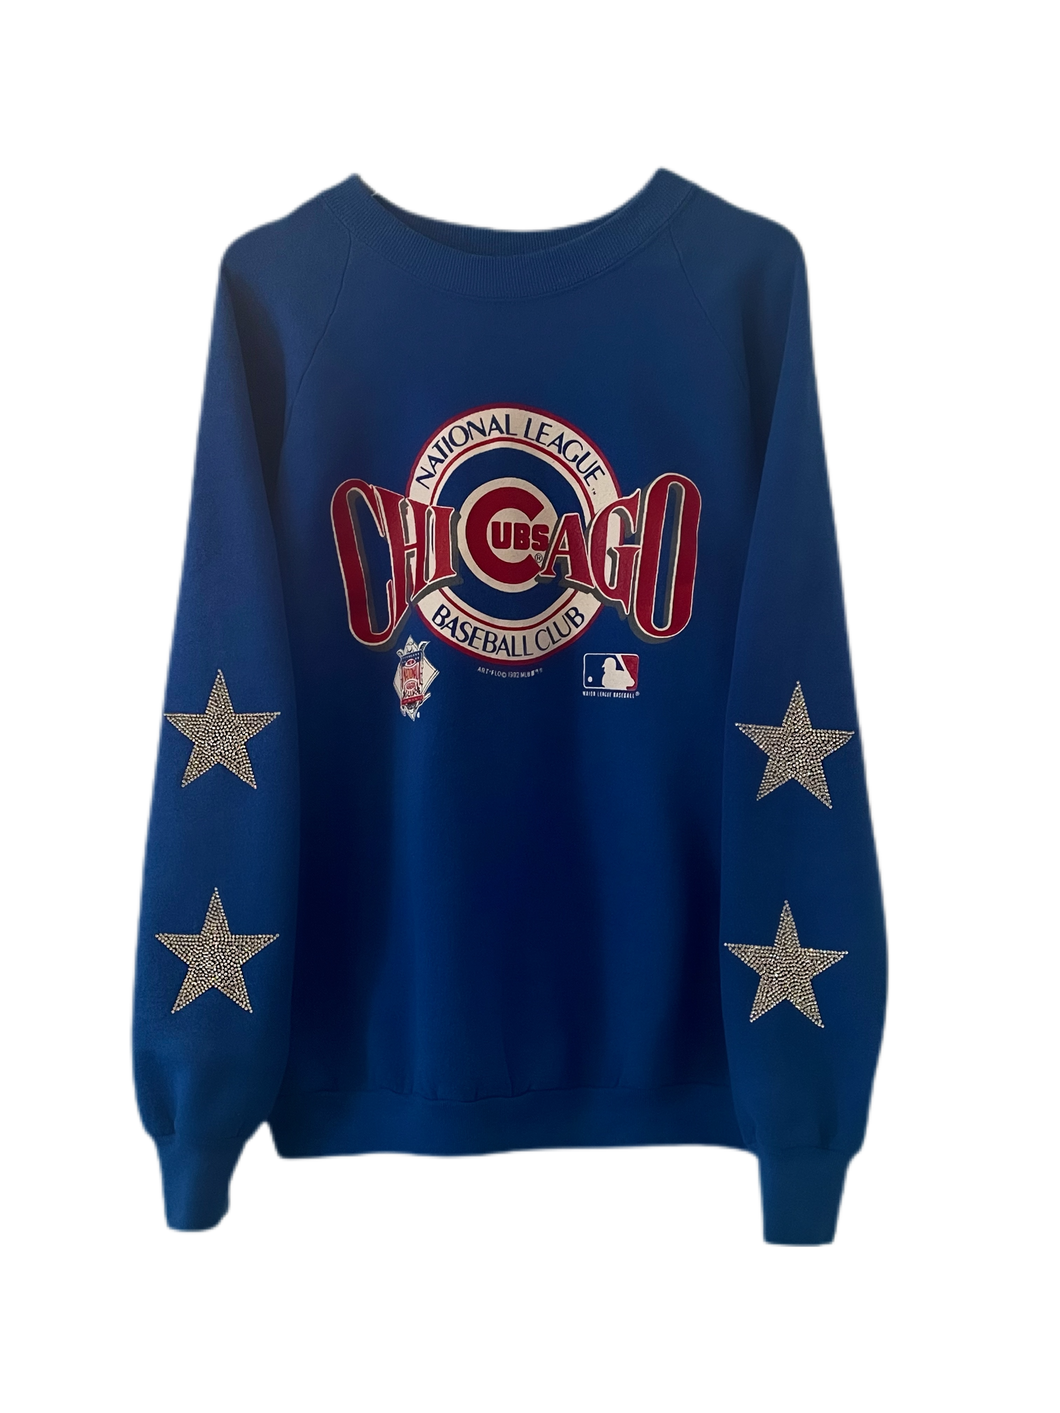 Chicago Cubs, MLB One of a KIND Vintage Sweatshirt with Crystal Star Design